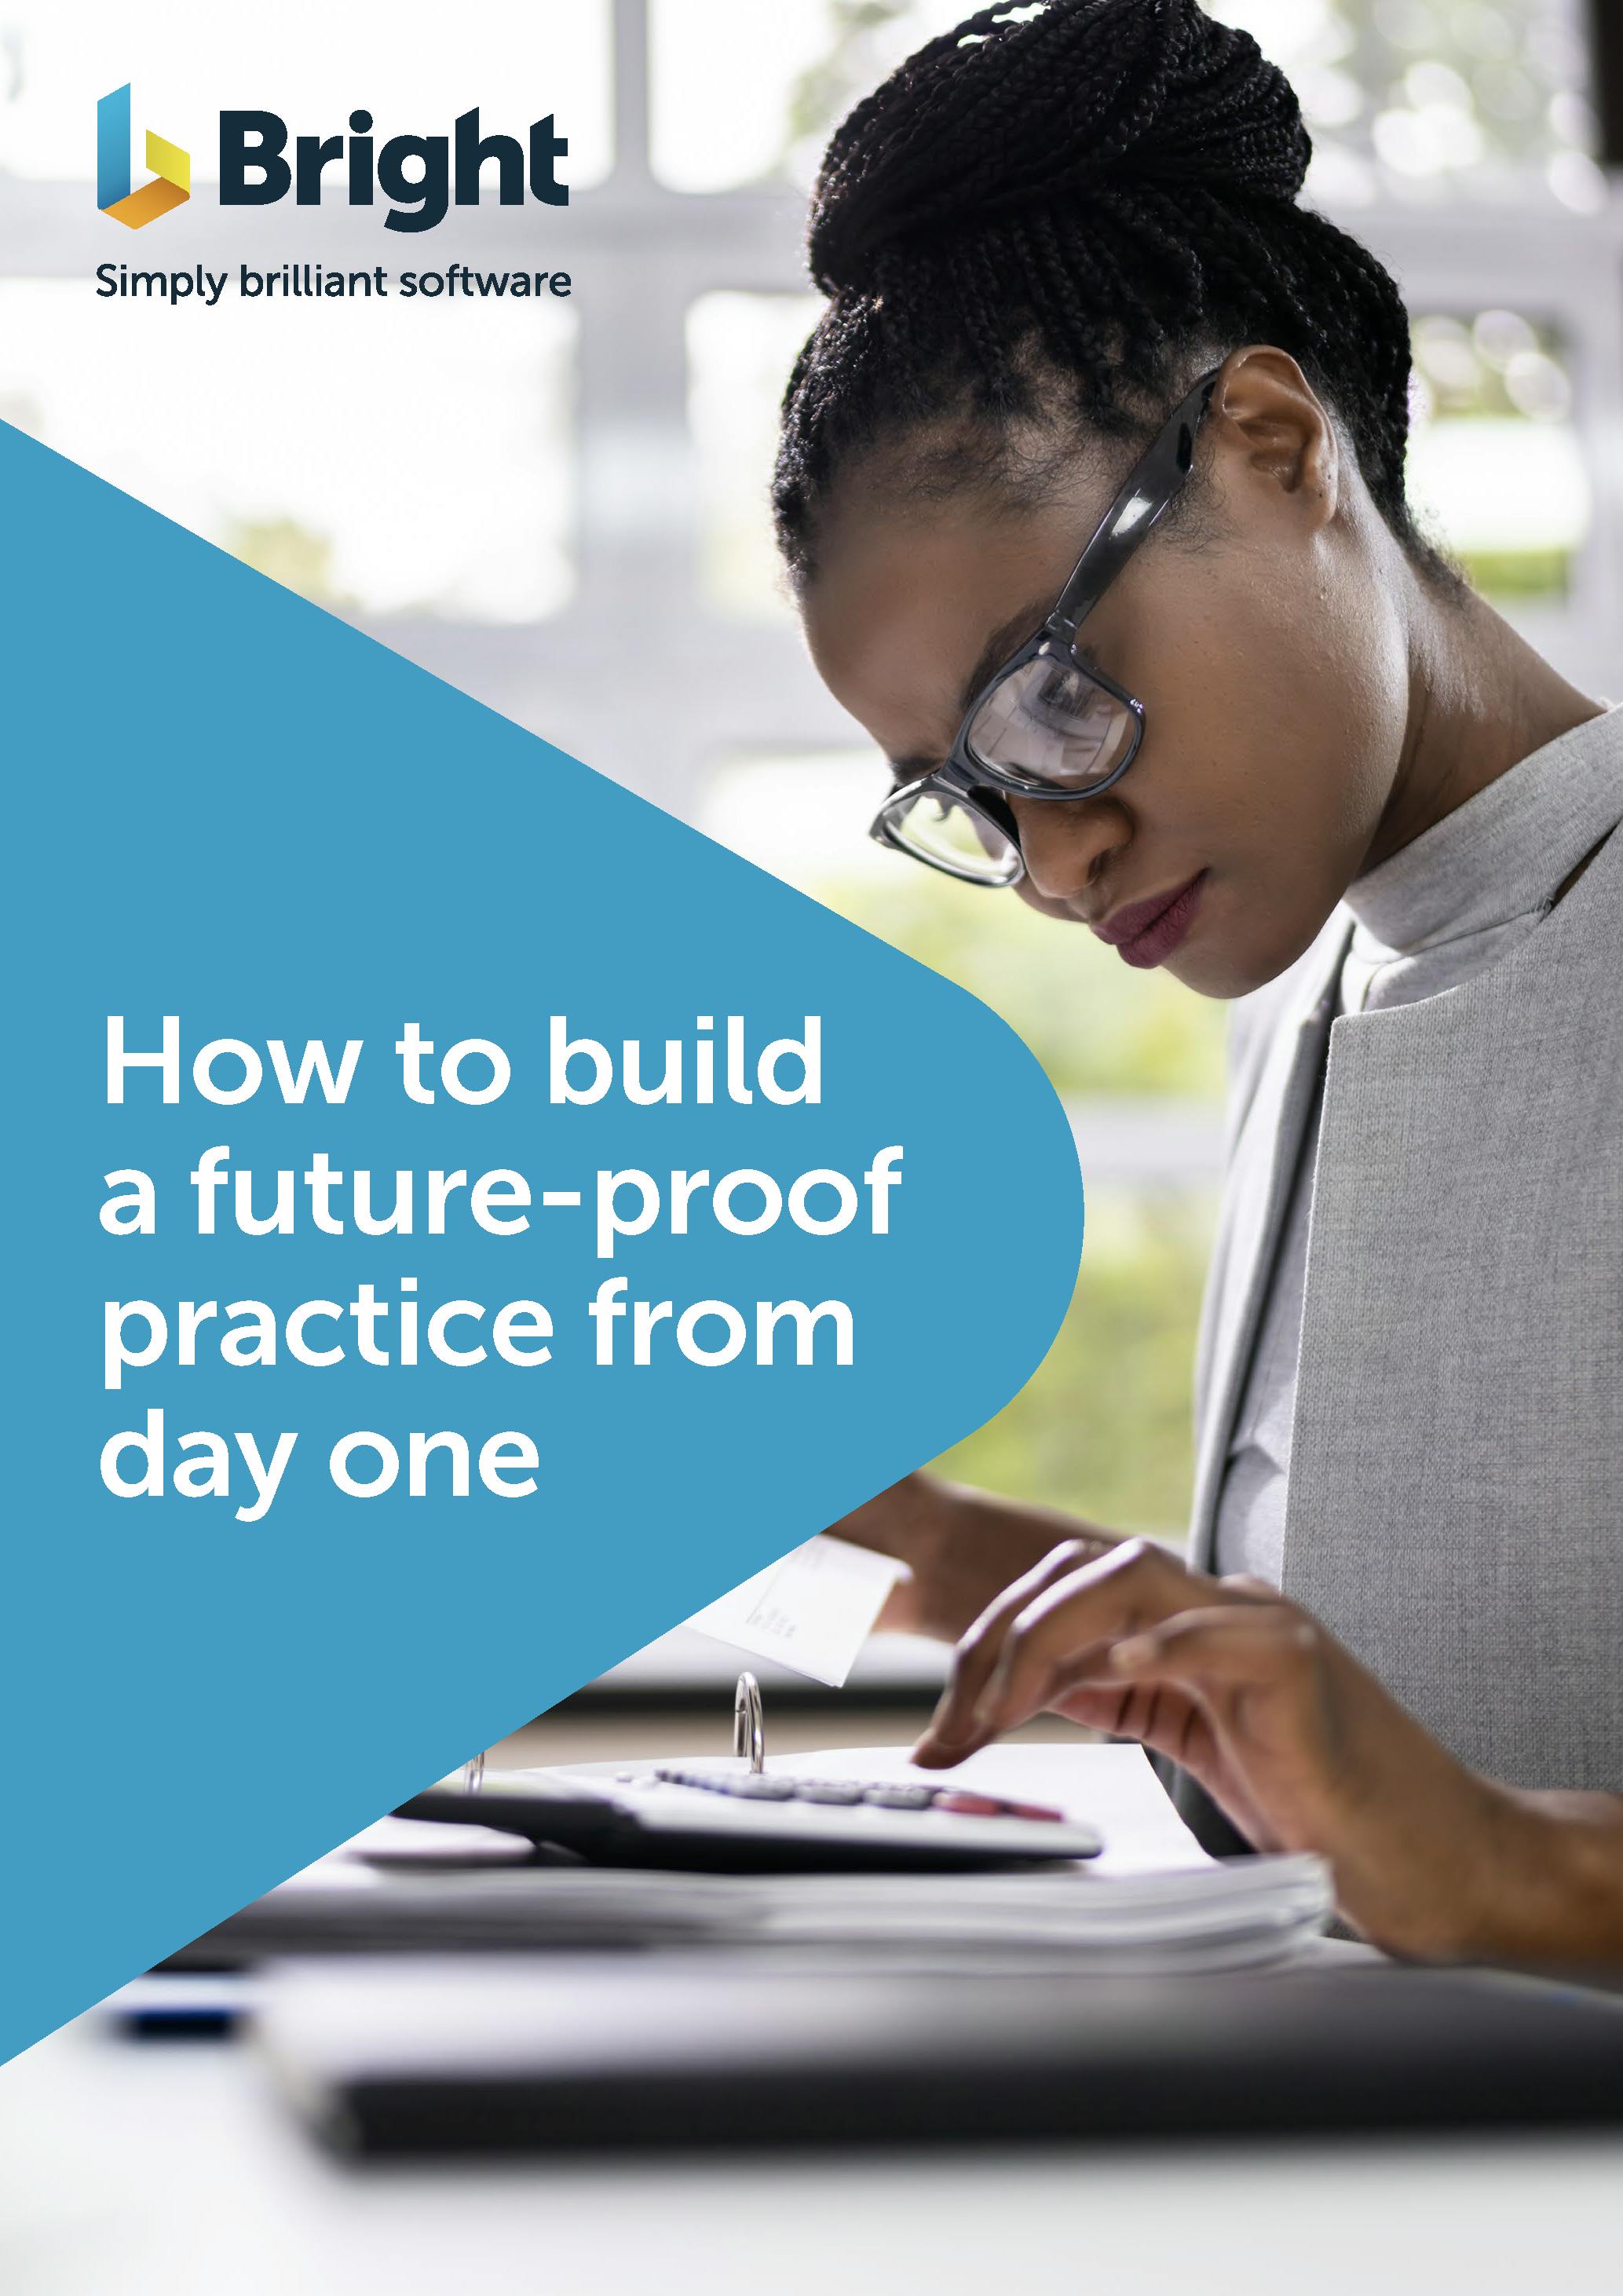 How to build a future-proof practice from day one